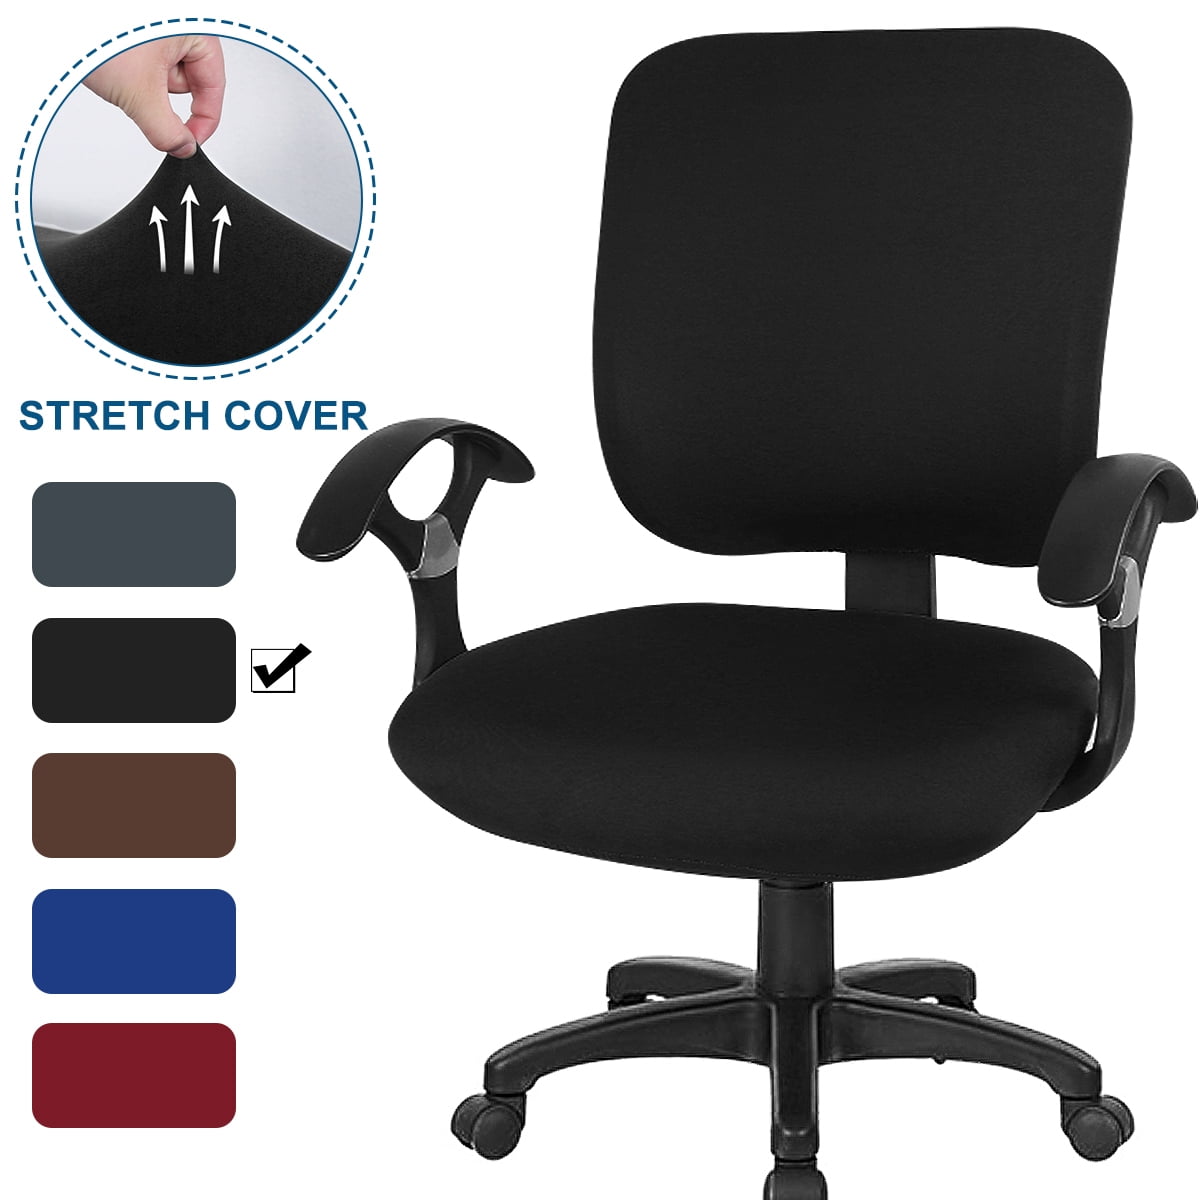 FORCHEER Office Chair Cover Set Stretchable 2 PCS for Computer Armrest Chair Slipcover Removable Washable Grey Geometric 